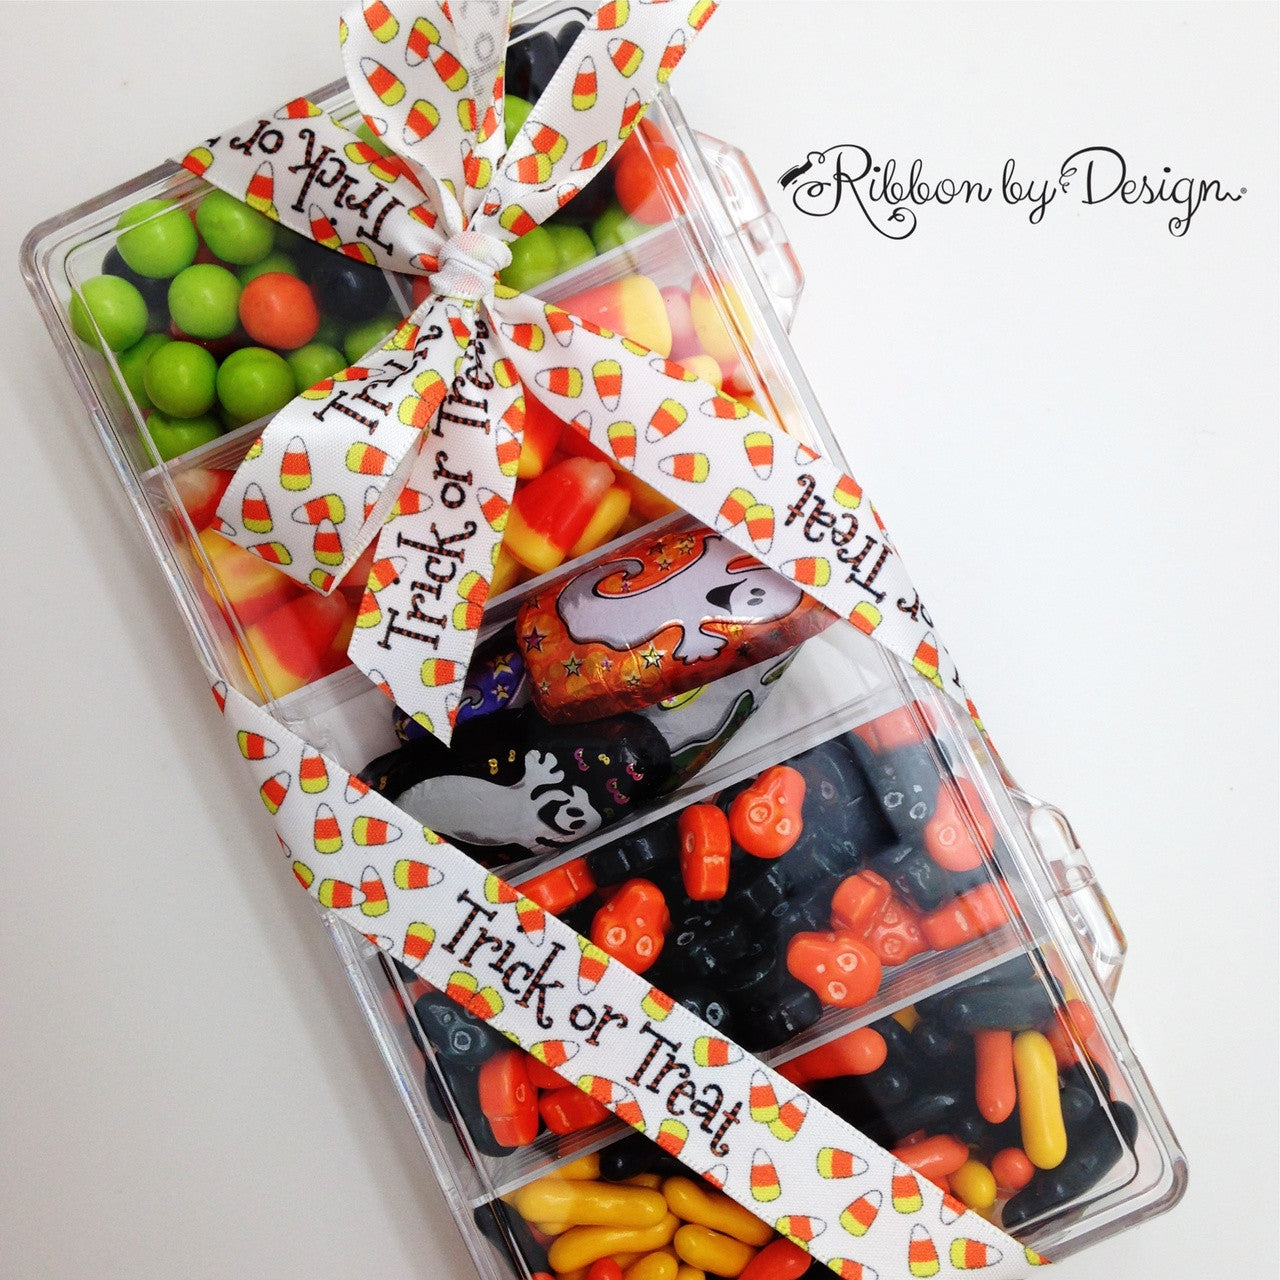 Trick or Treat Ribbon with candy corn on 5/8" white single face satin ribbon